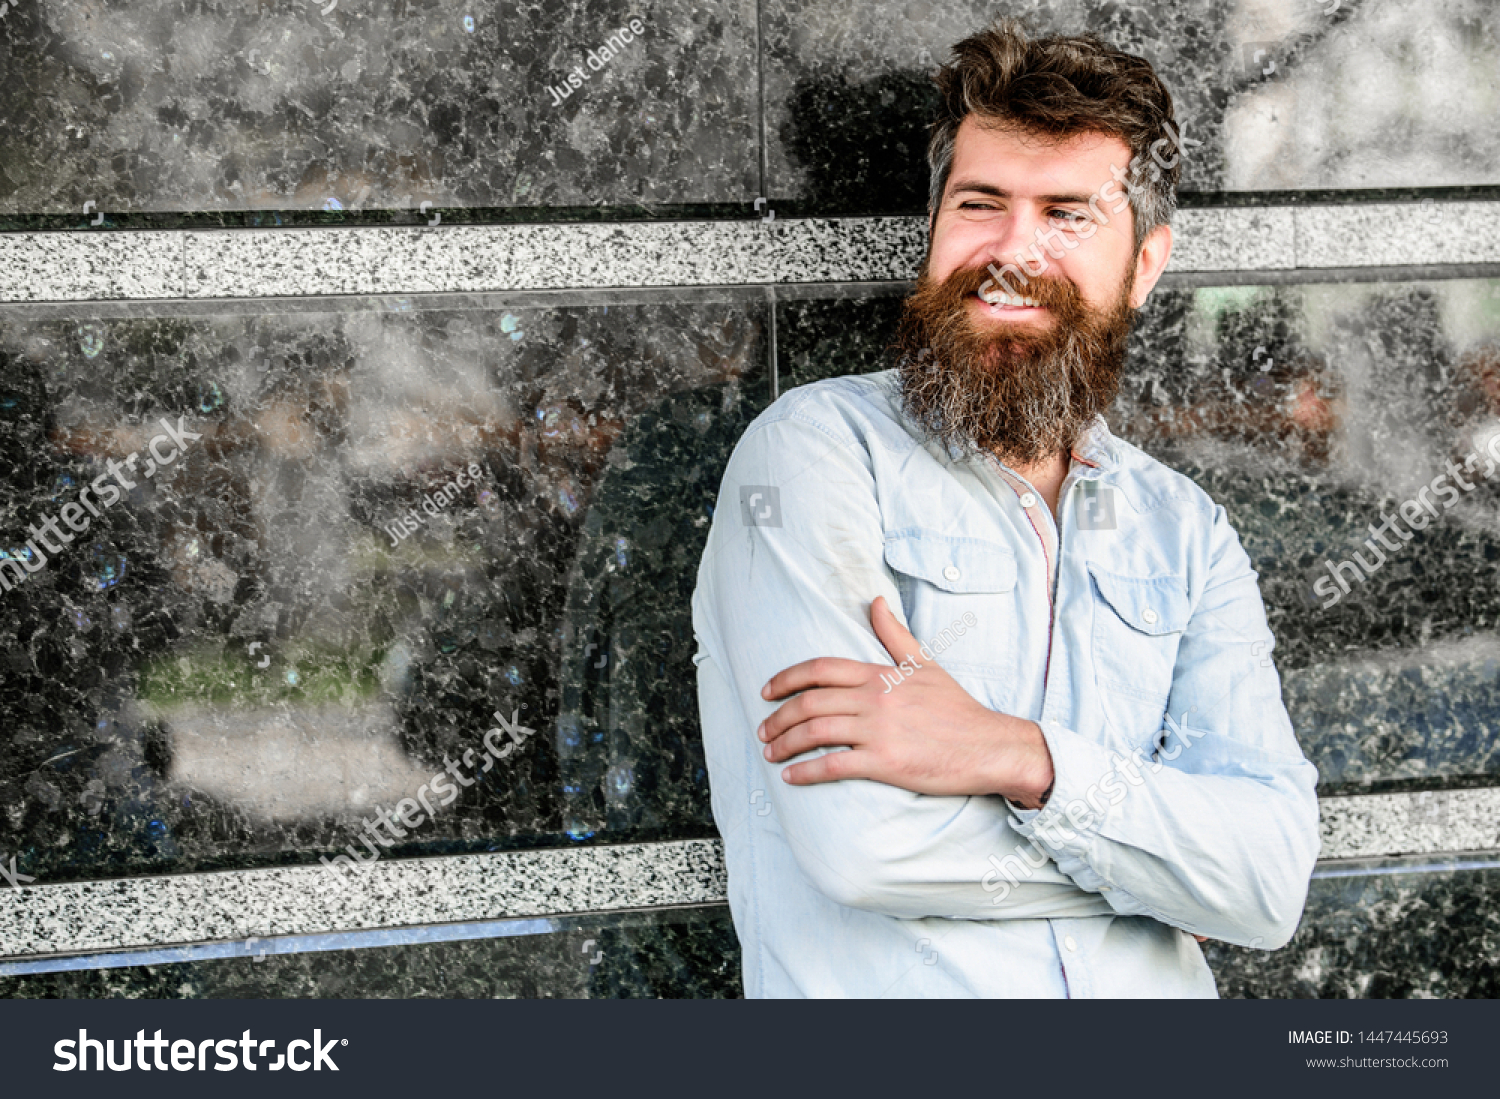 Beard grooming. Guy masculine appearance with long beard. Barber concept. Beard care. Man attractive bearded hipster posing outdoors. Masculinity and manliness. Confident posture of handsome man. #1447445693